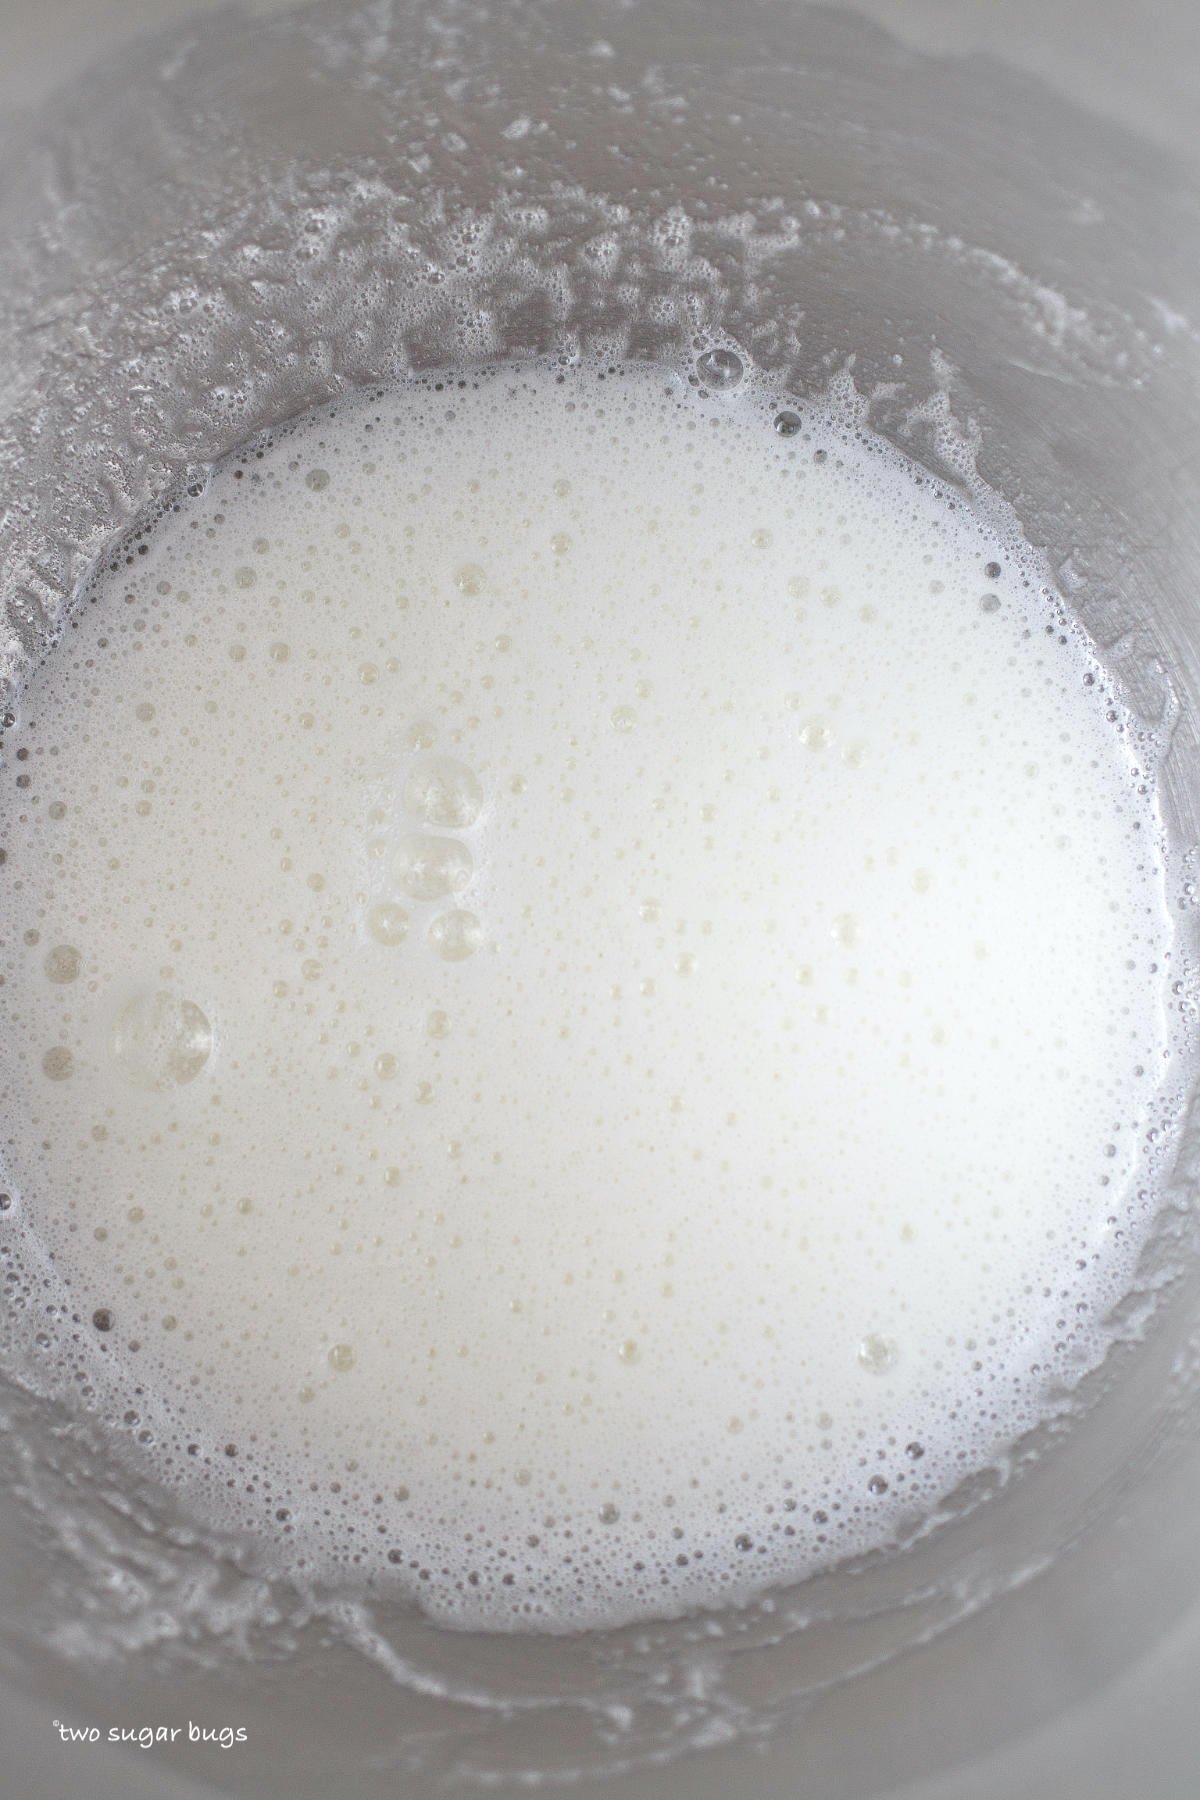 egg whites and sugar dissolved in a mixing bowl